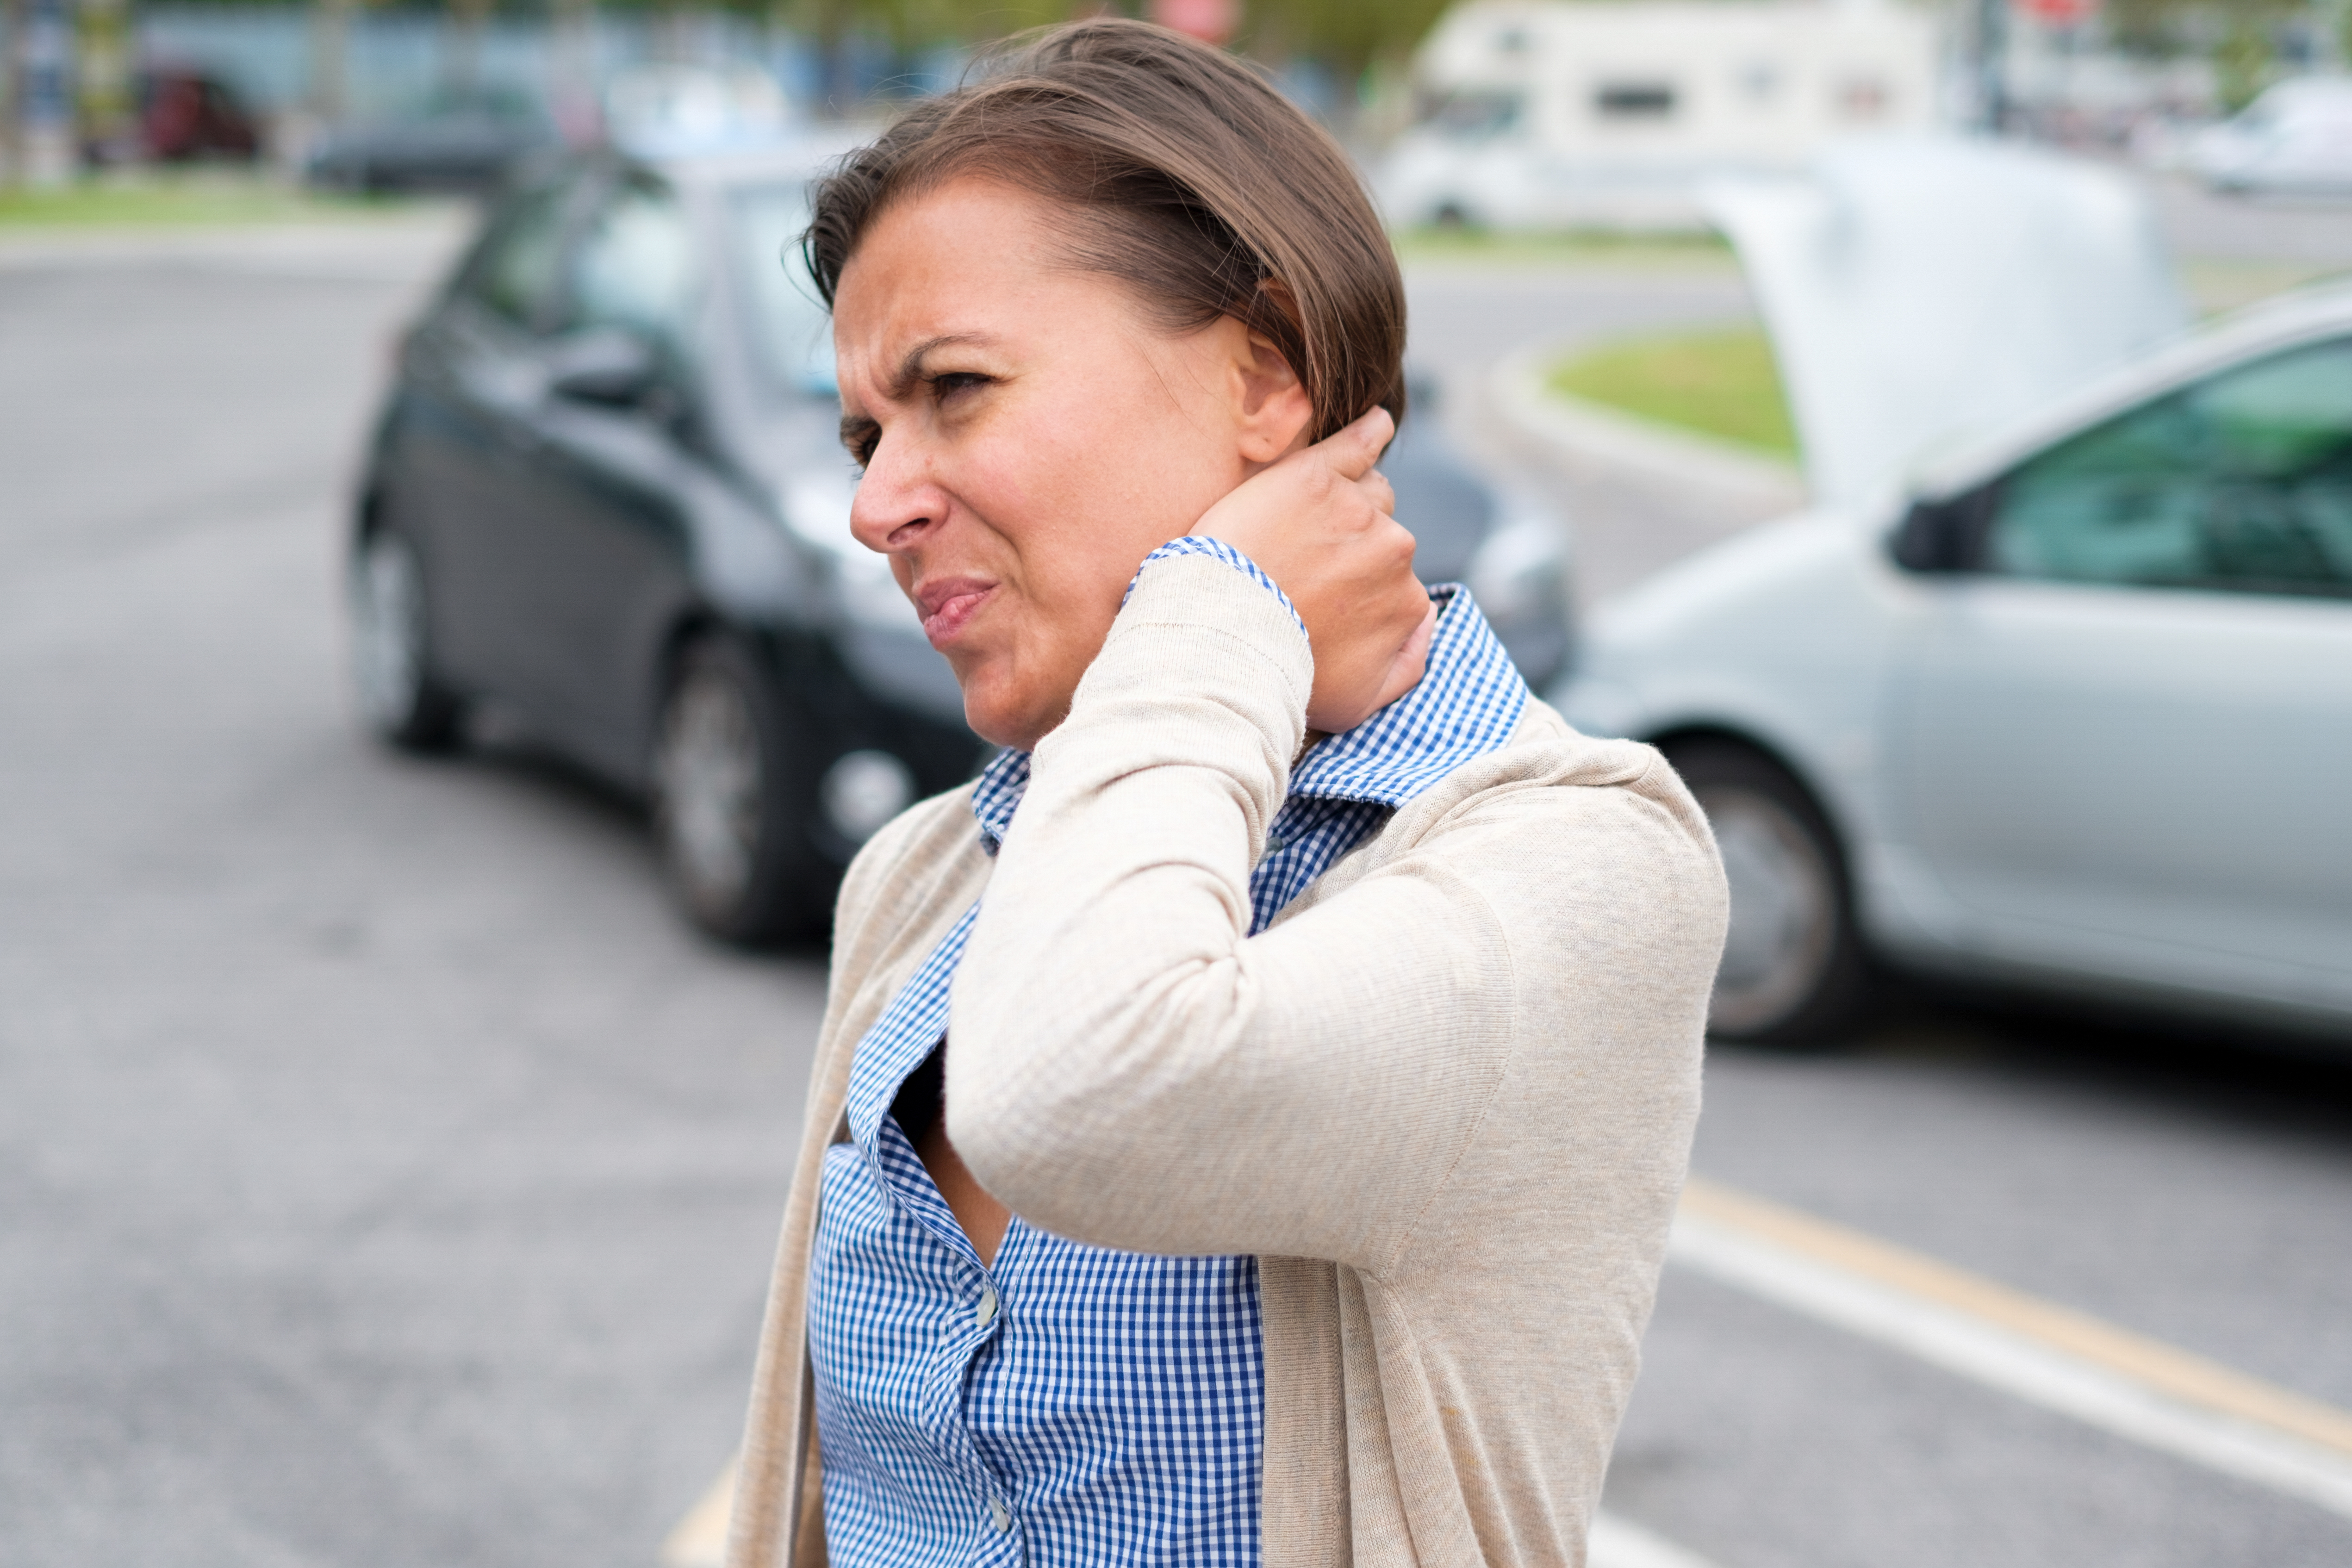 Woman with whiplash from car accident